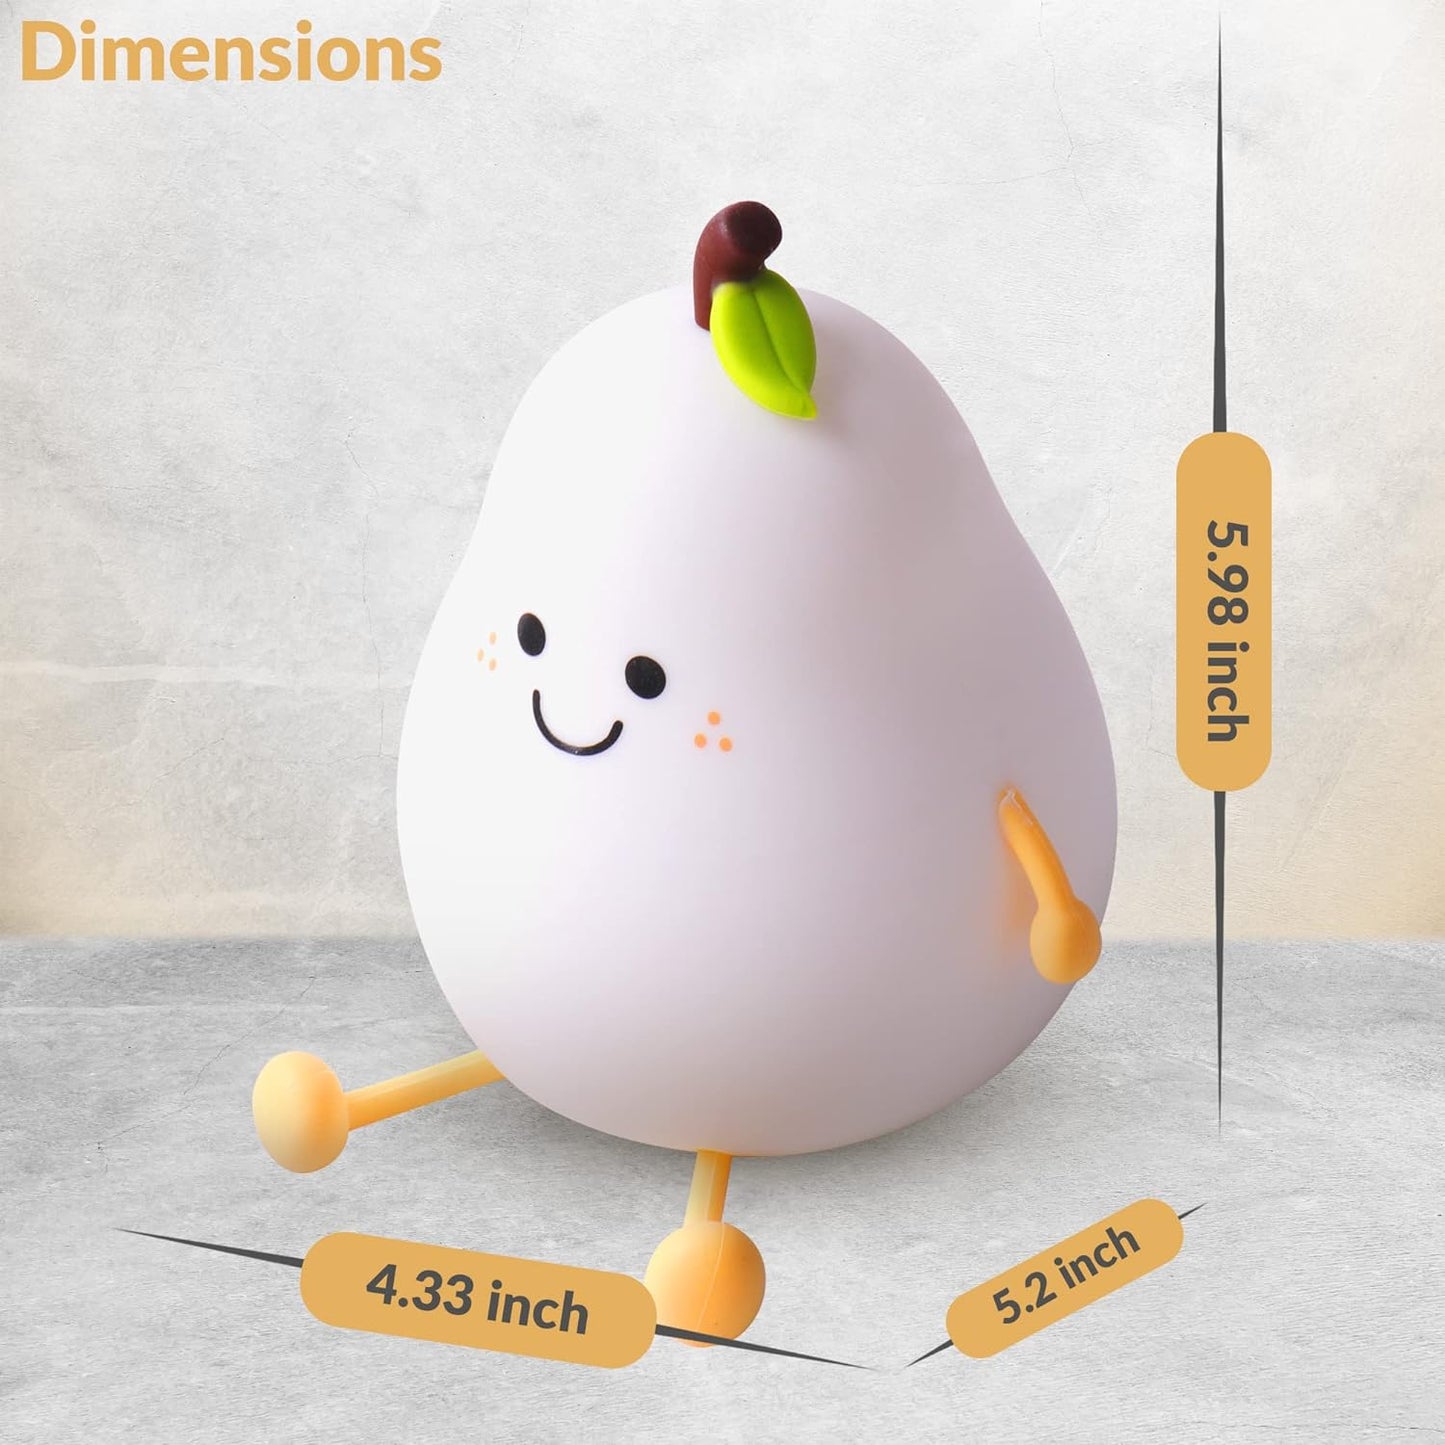 Pear Silicone Touch Night Lamp